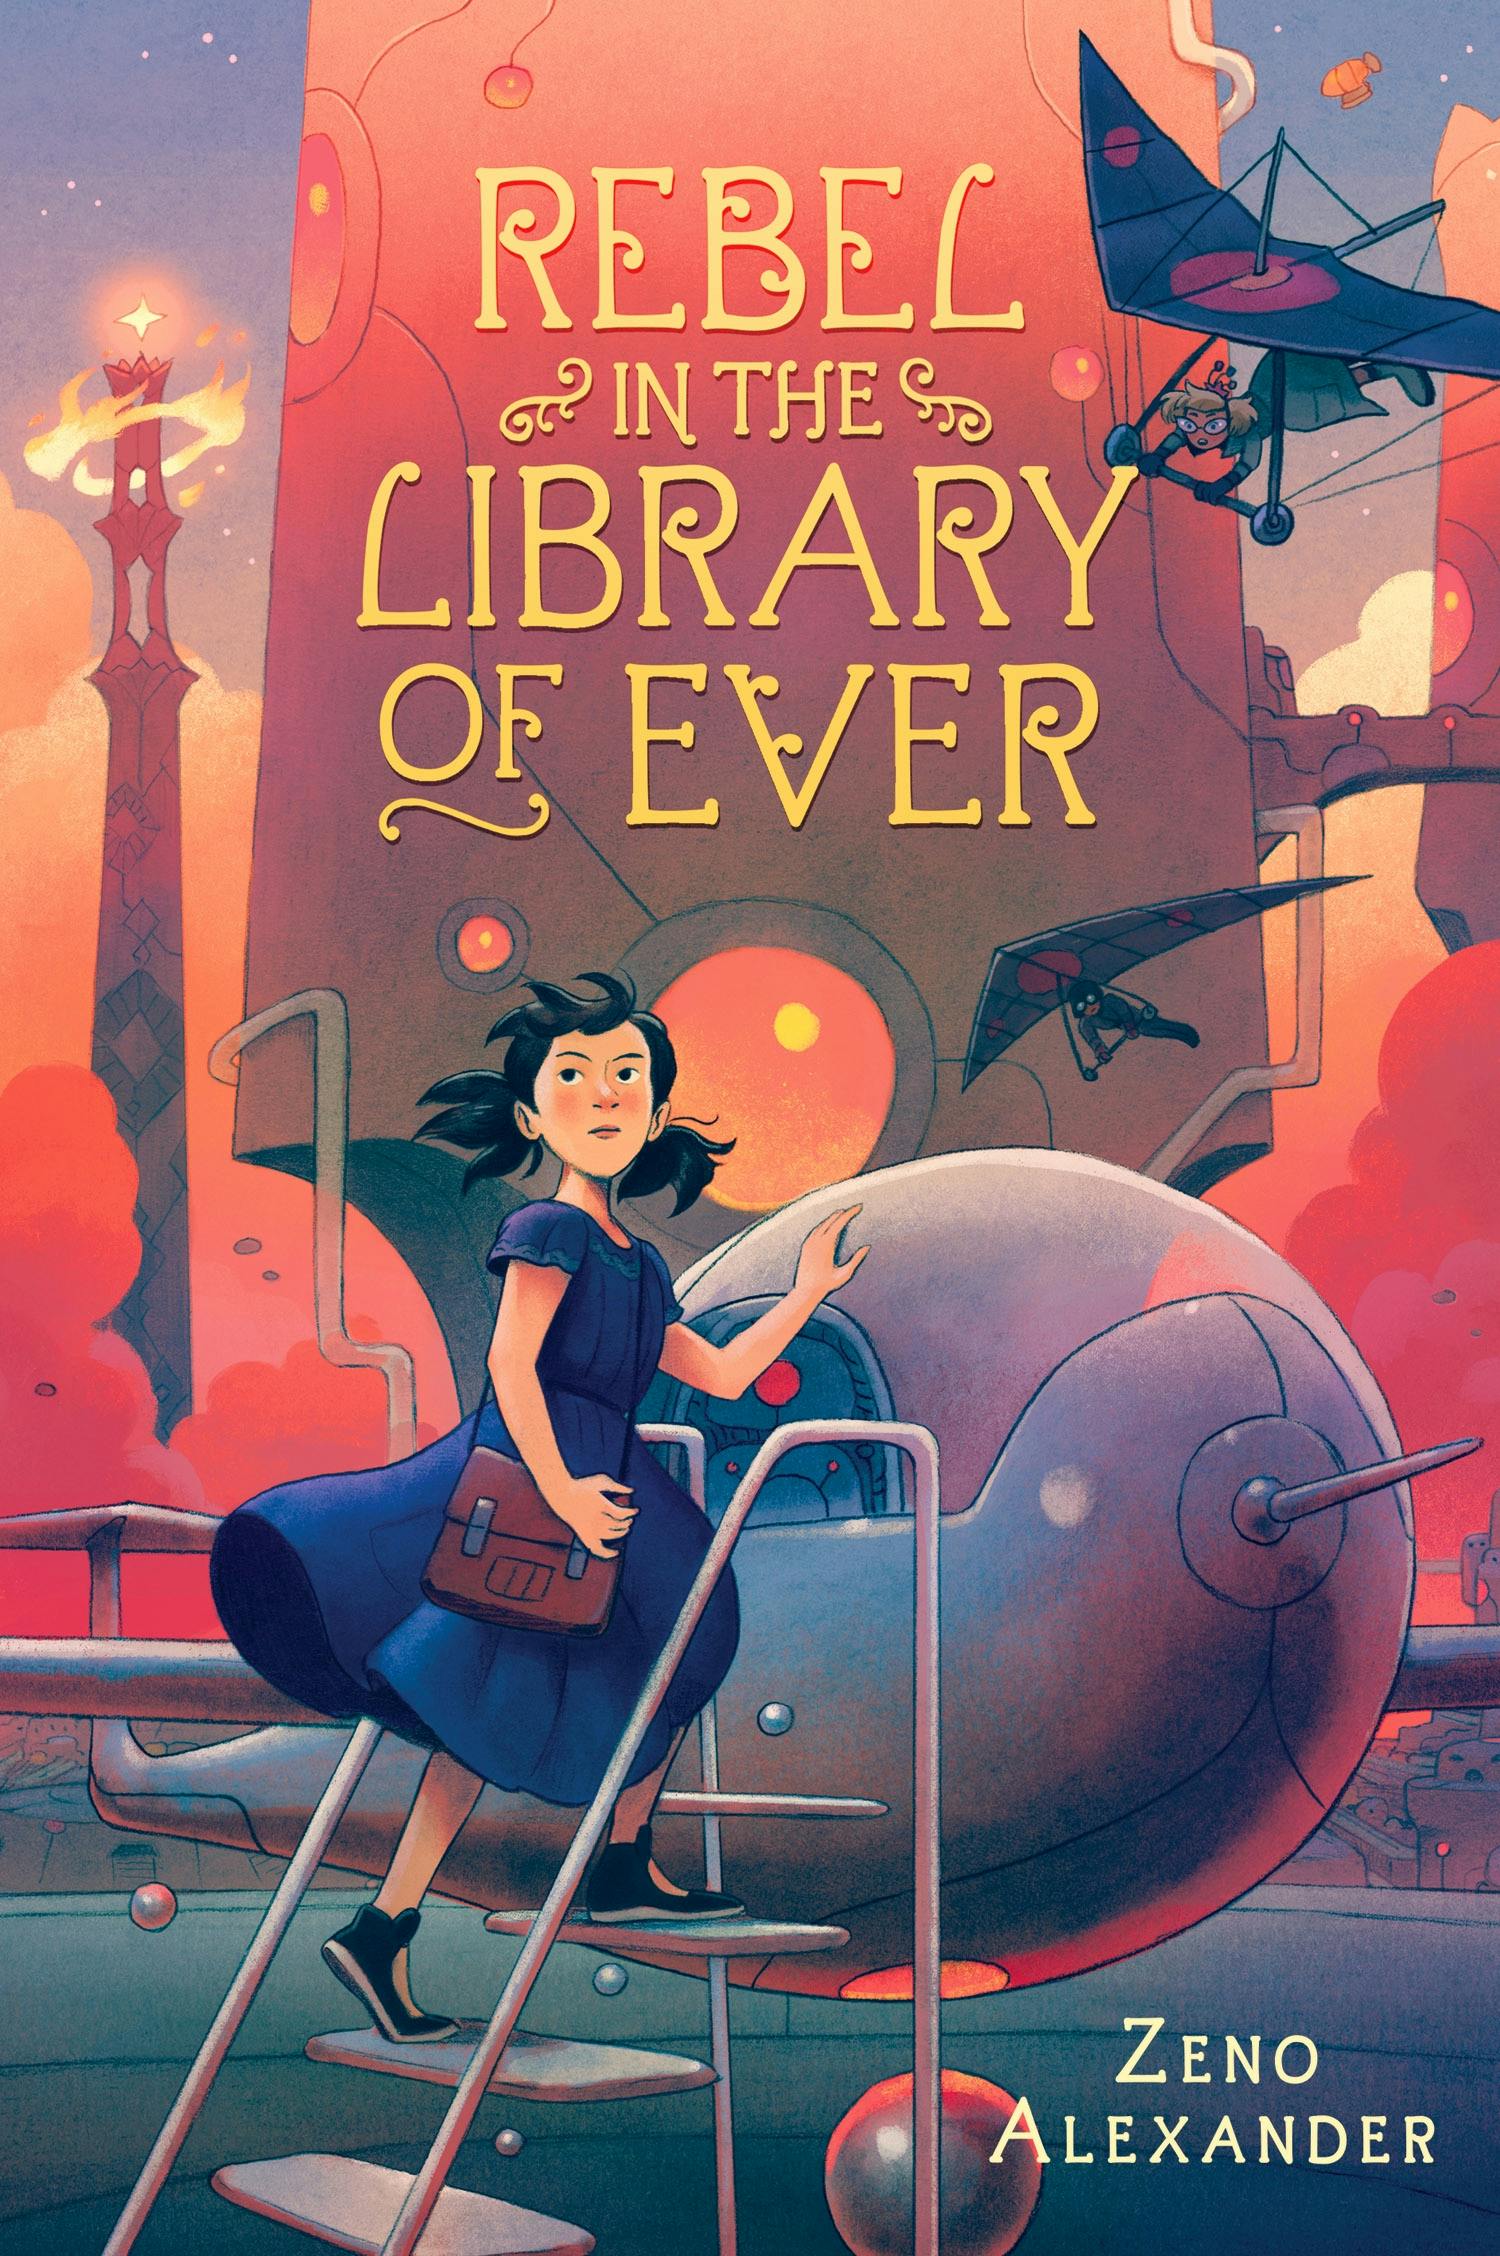 Chapter 2 of The Library of Ever, Ms. Mari is reading Chapter 2 from The  Library of Ever by Zeno Alexander.